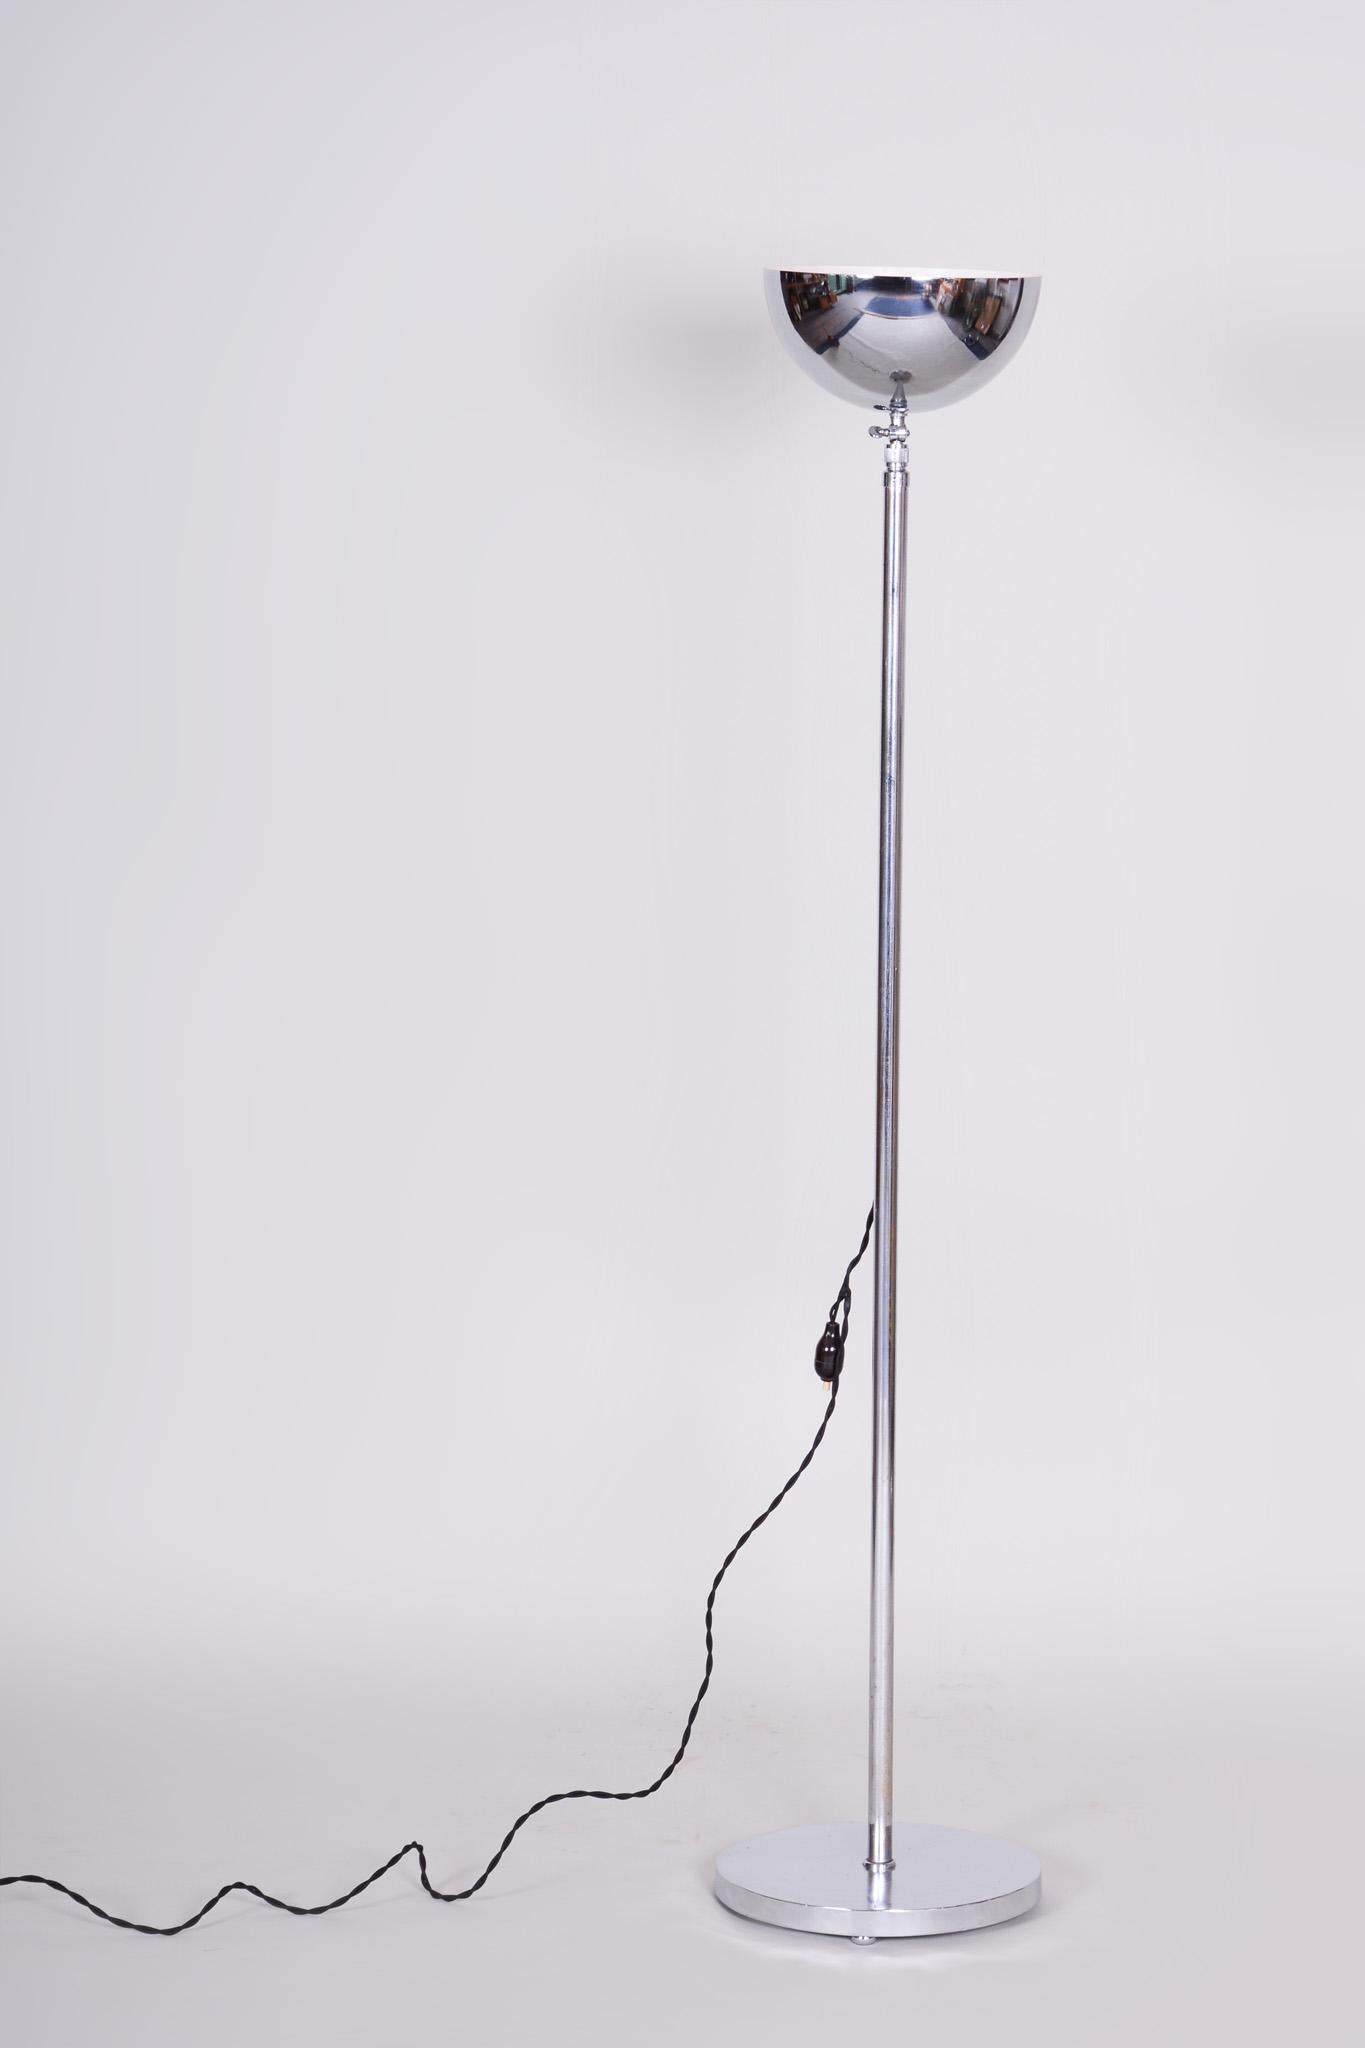 Restored Bauhaus Floor Lamp Made in the 1930s, Made Out of Chrome Plated Steel For Sale 5